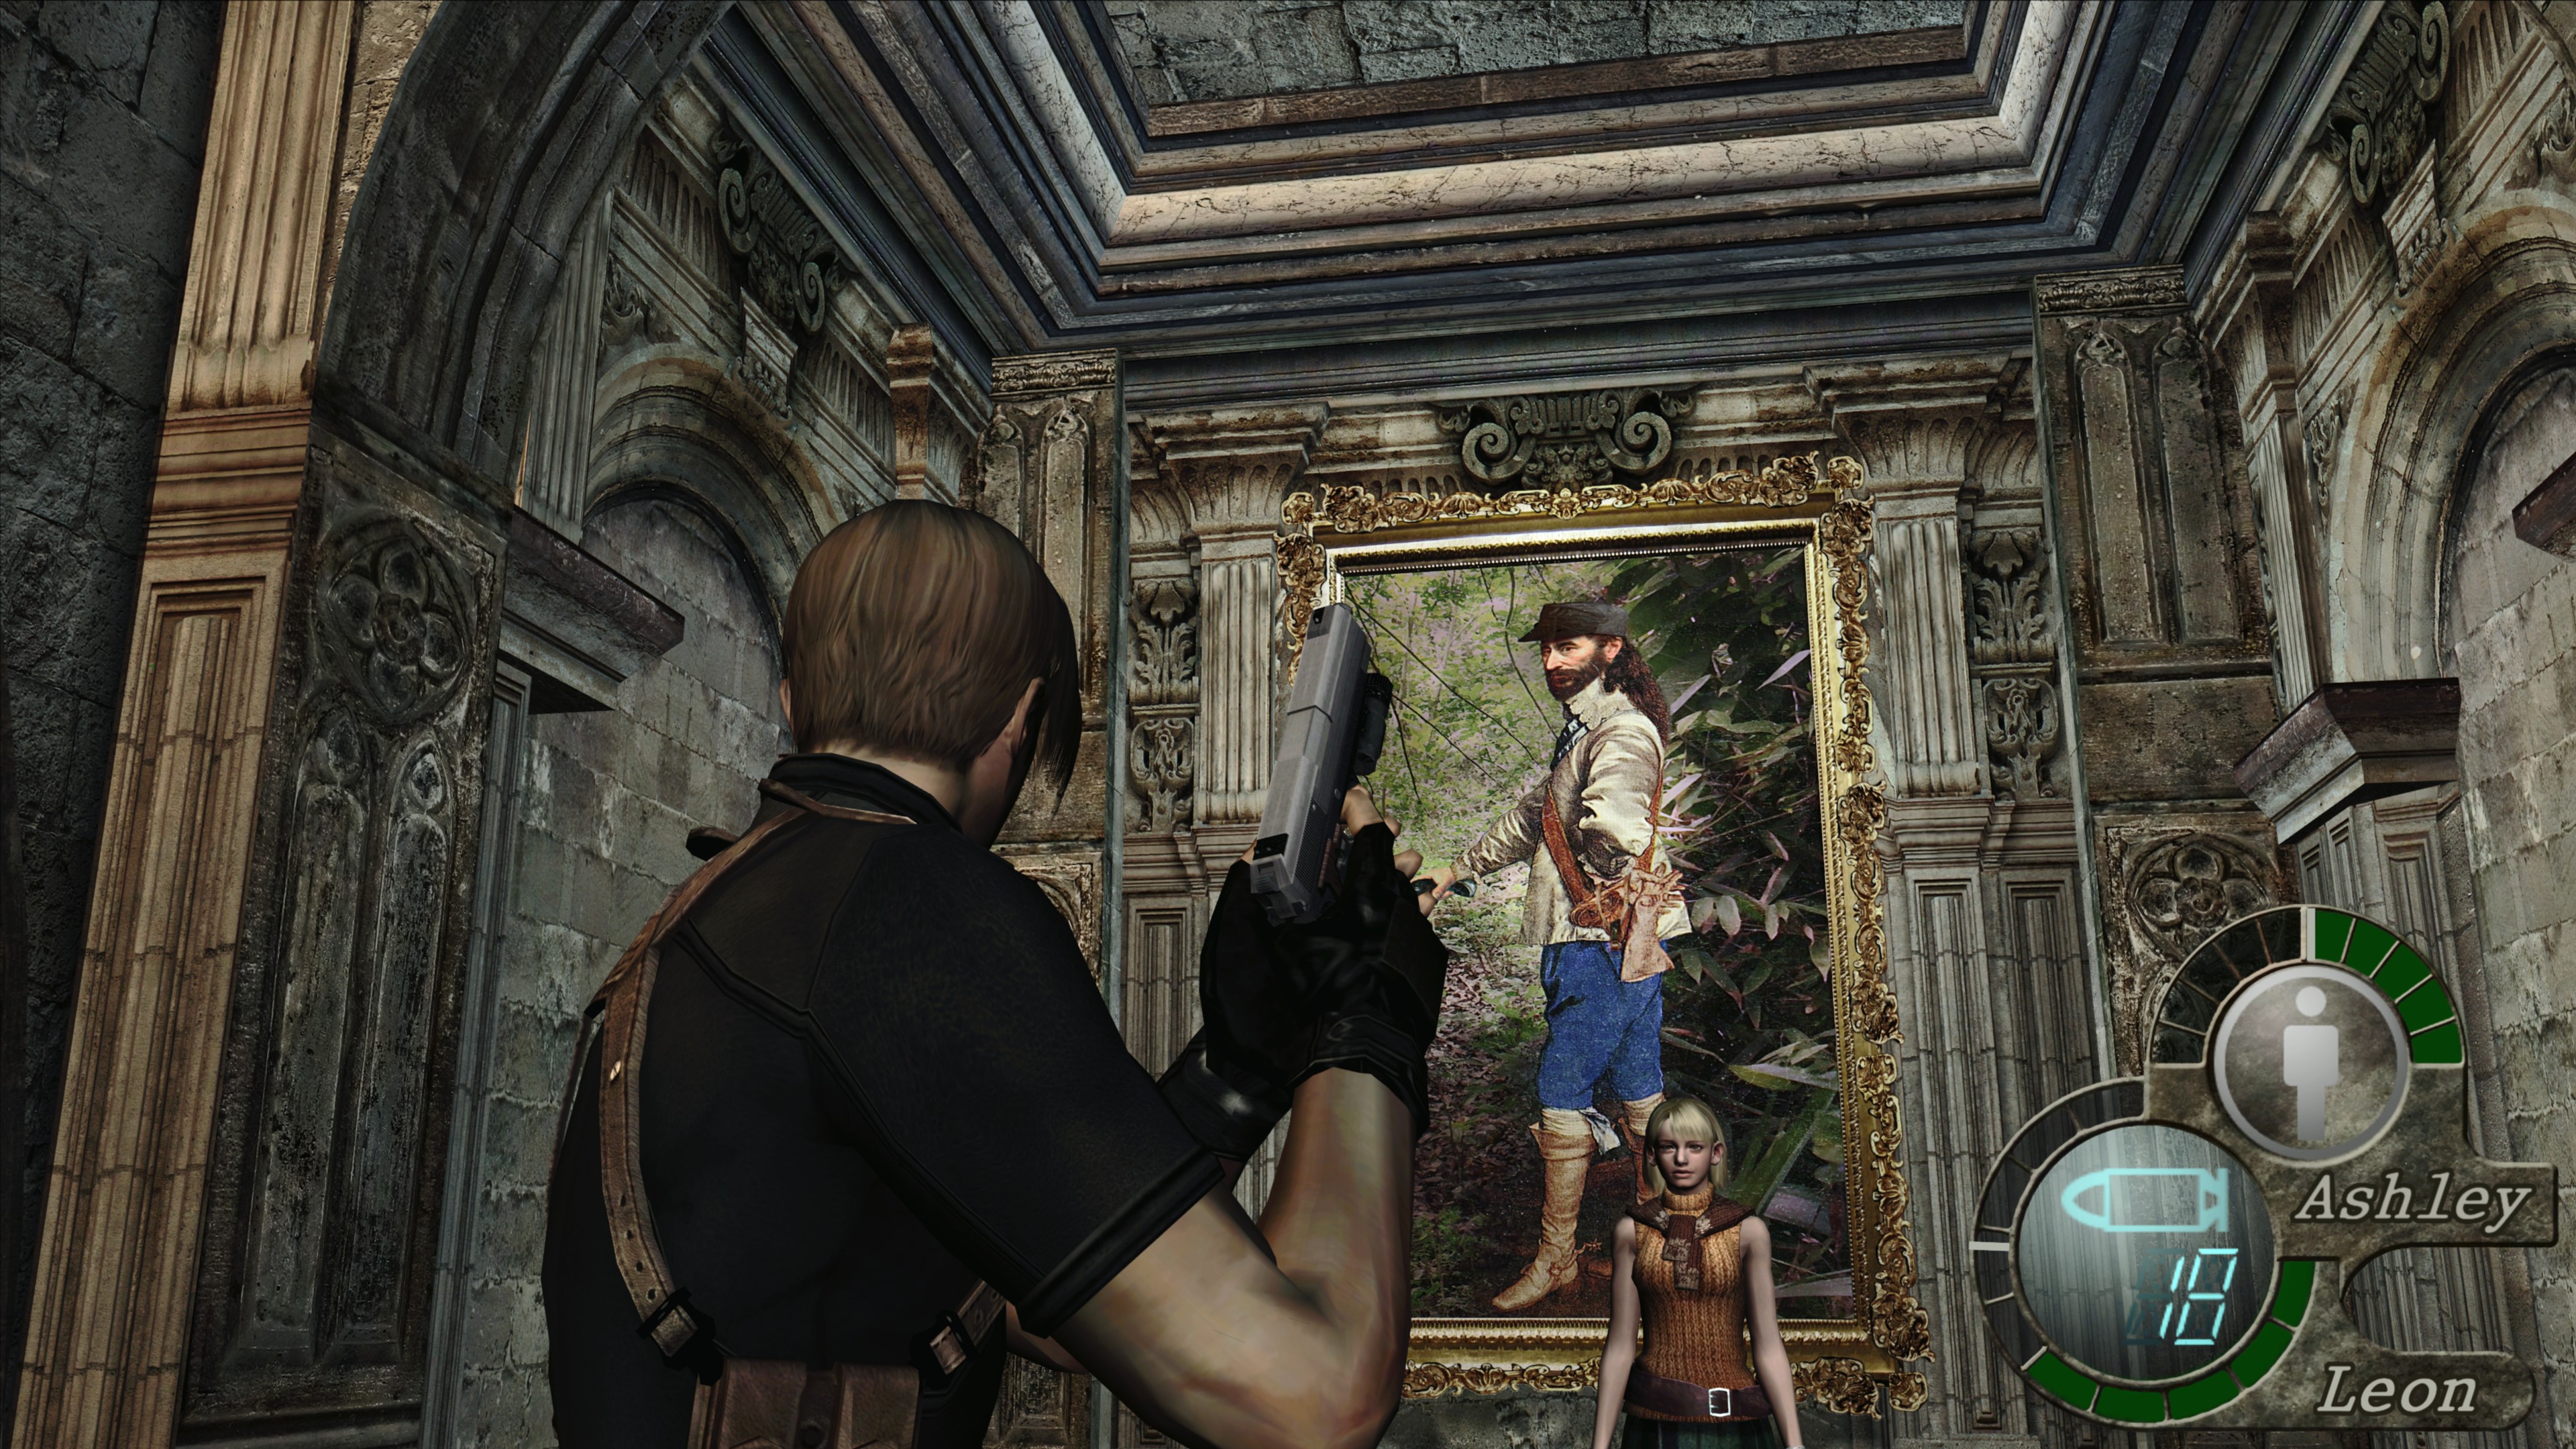 RE4 is looking nice with the new mod release. 